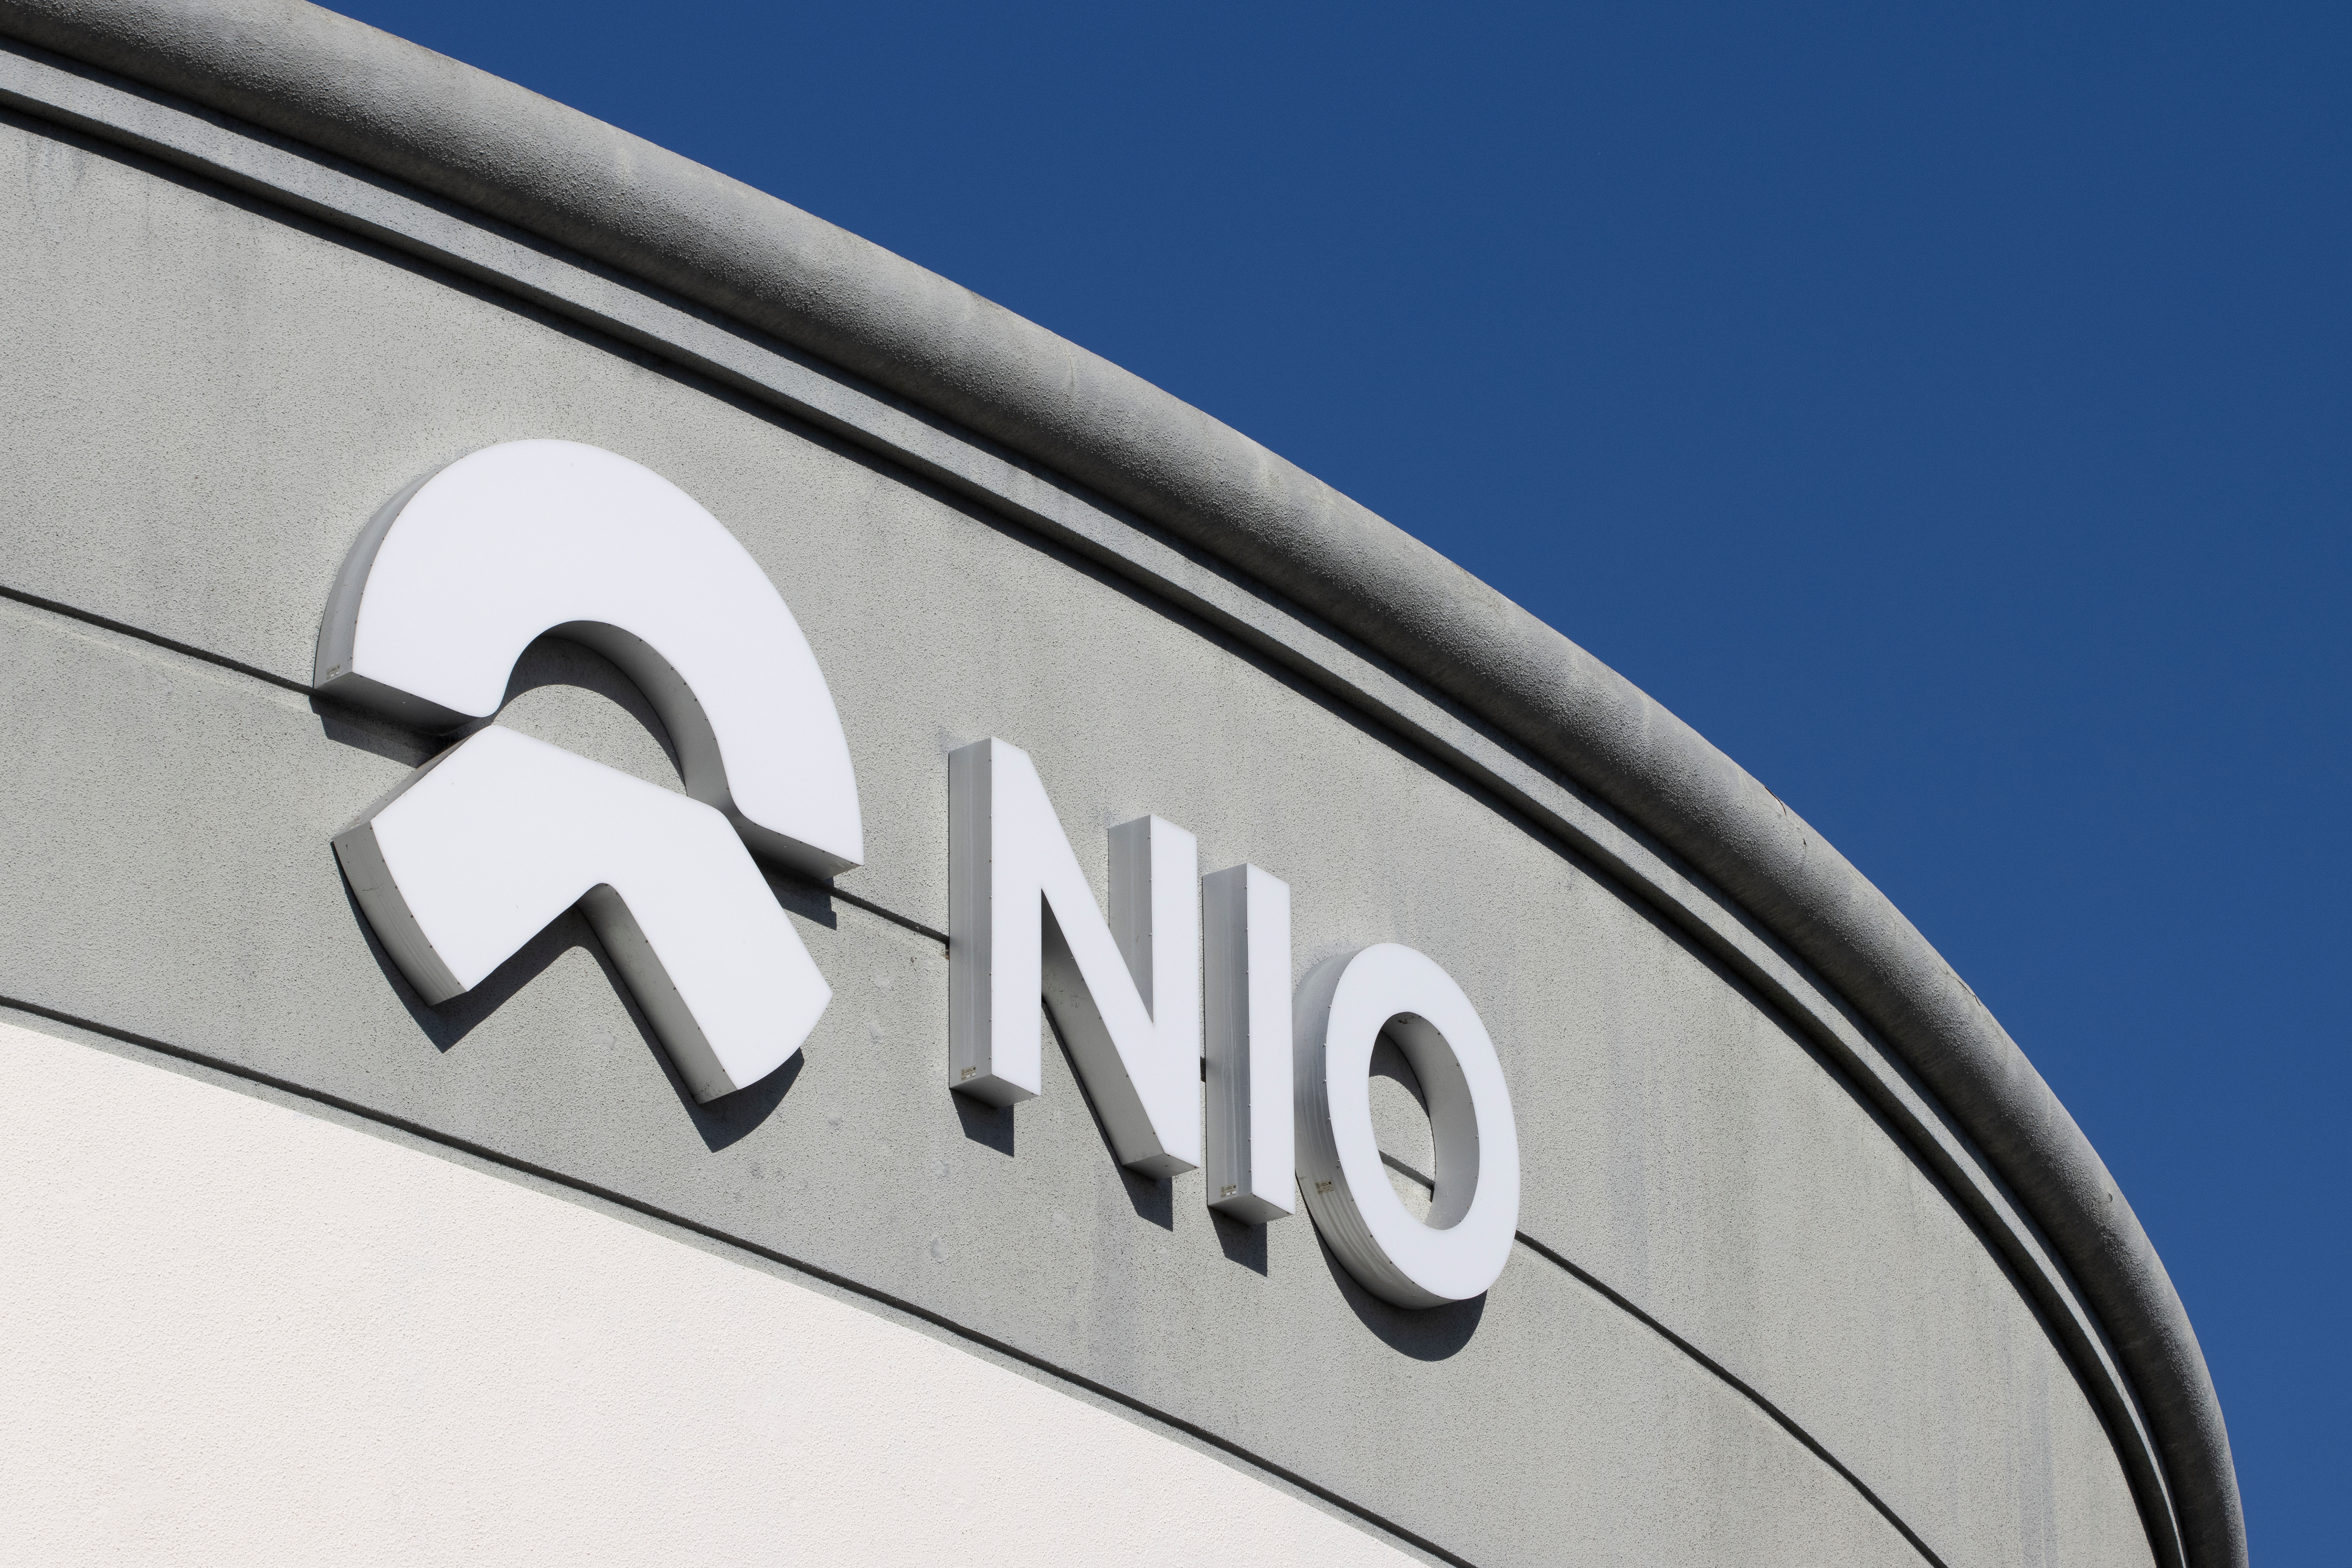 Learn more about this company! Source: Nio.